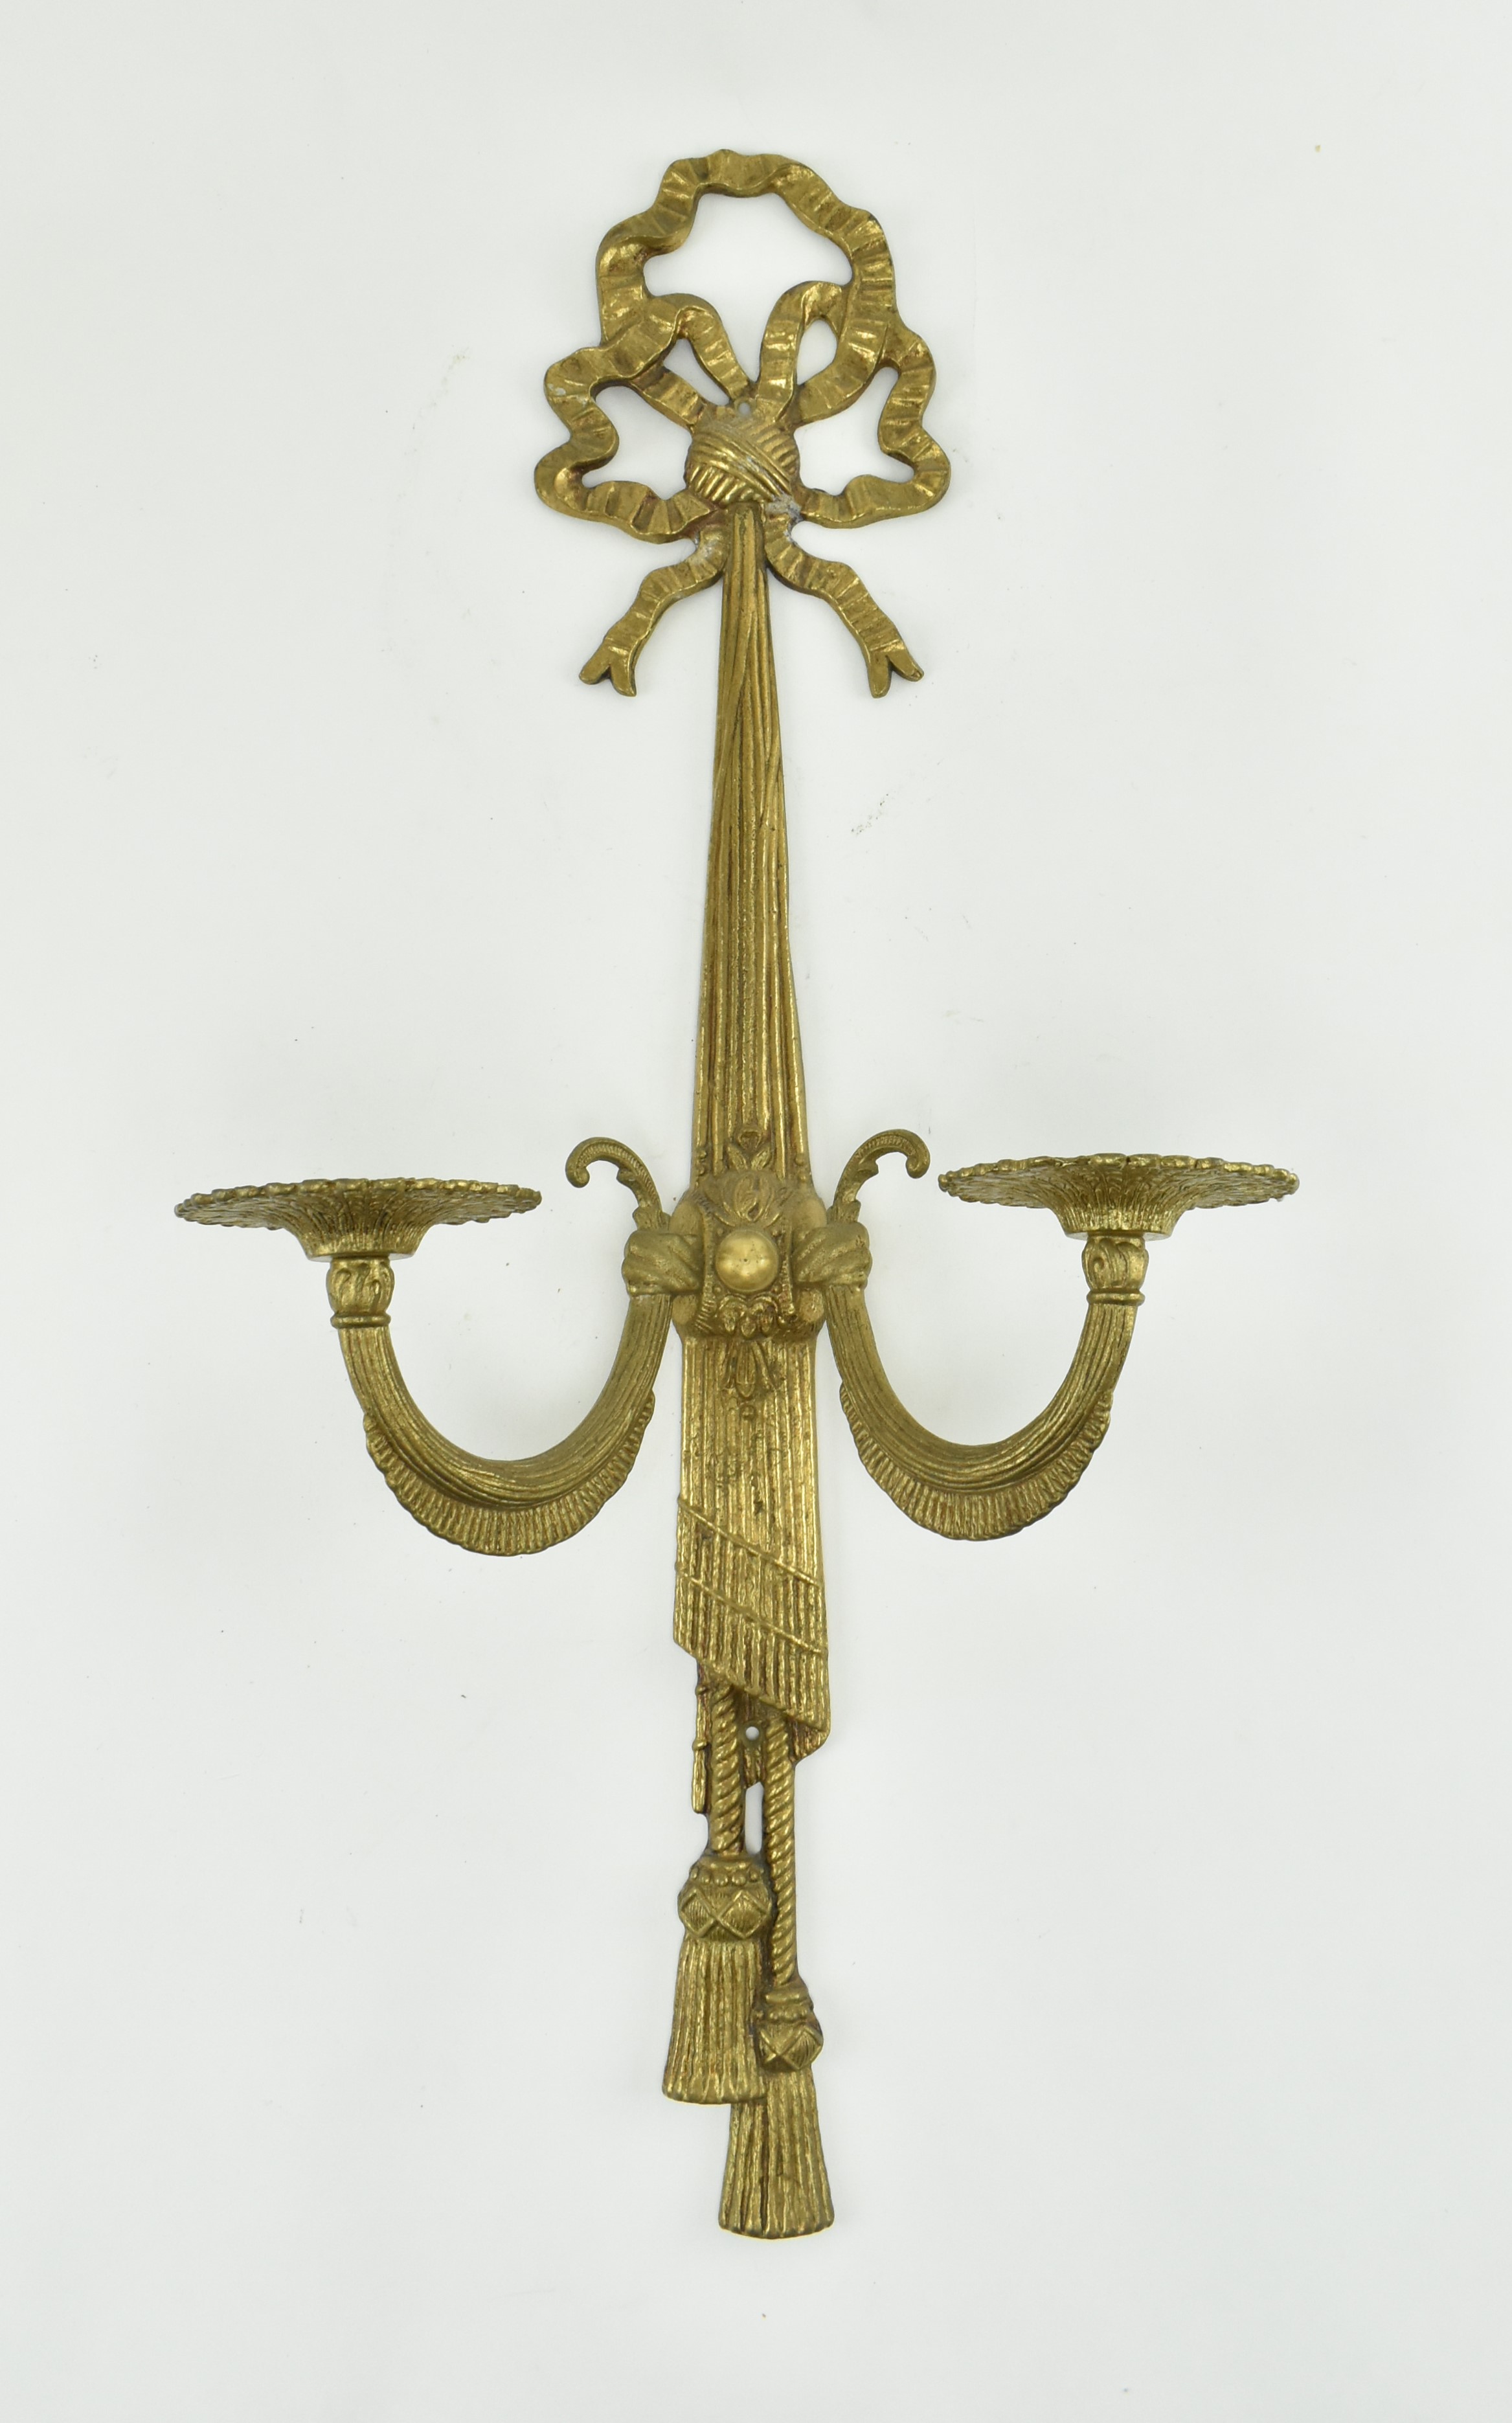 EARLY 20TH CENTURY REGENCY REVIVAL GILT METAL WALL SCONCE